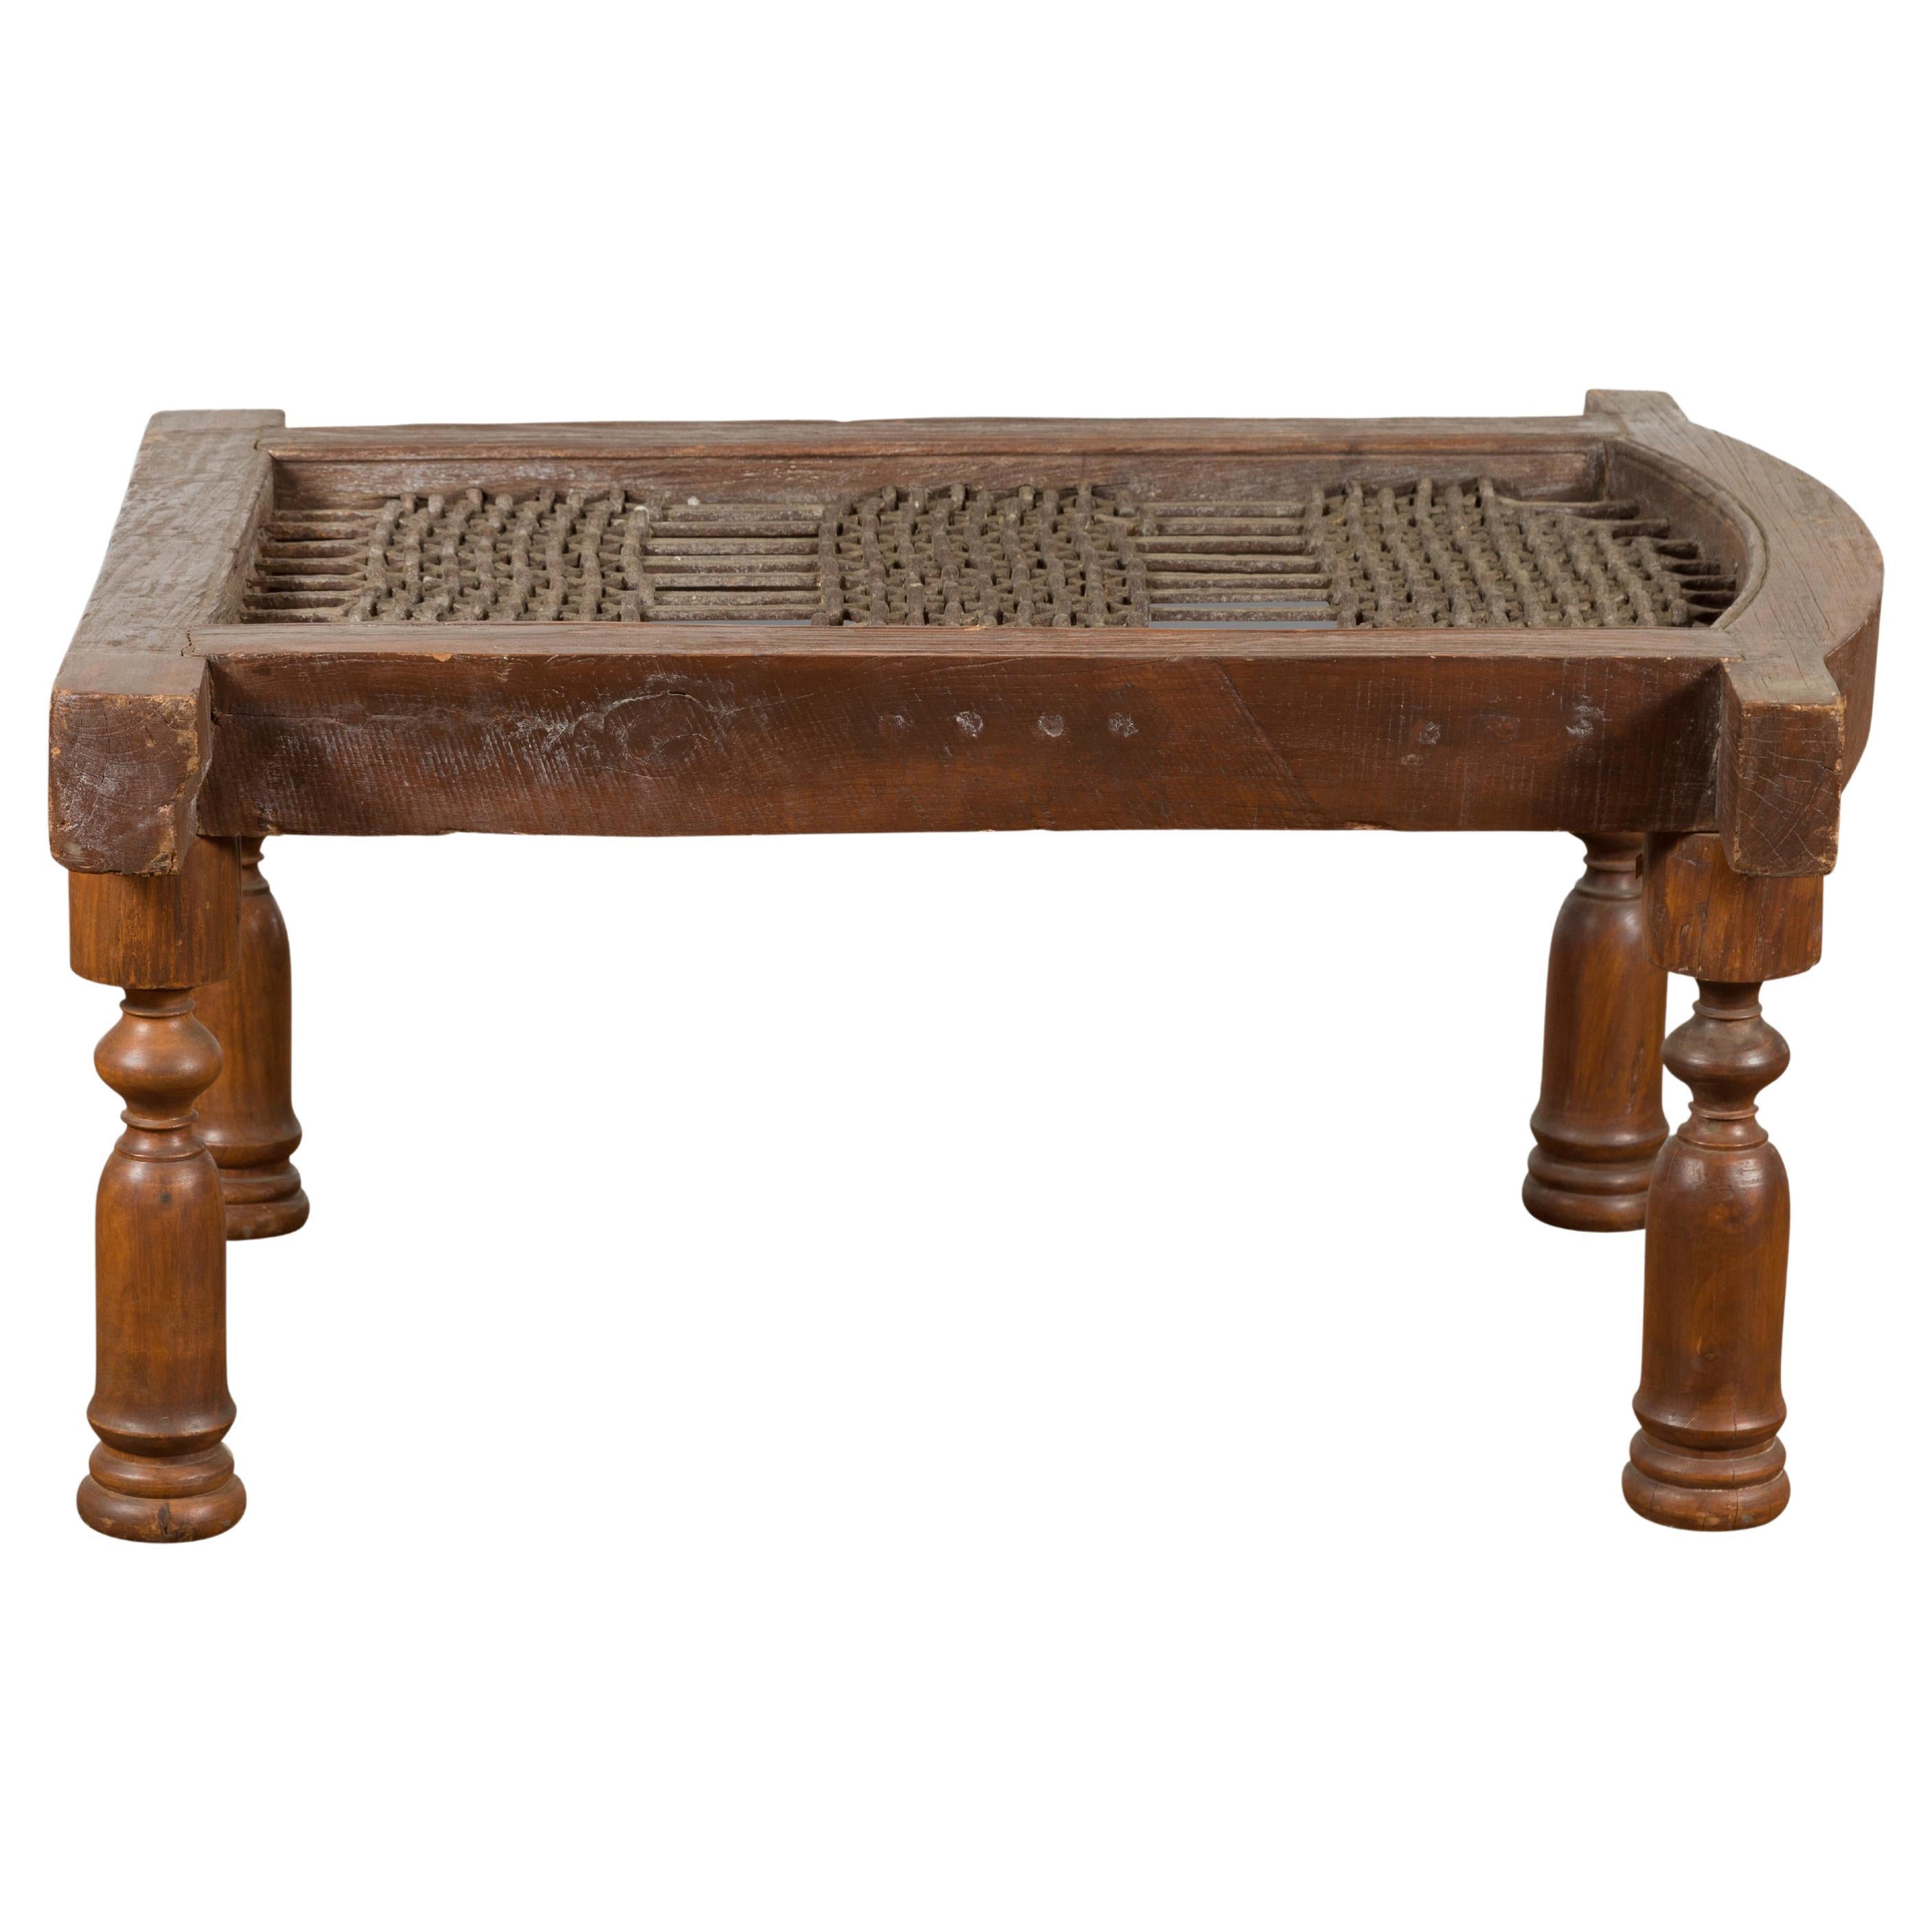 Rustic 19th Century Indian Iron Window Grate Made Into a Coffee Table For Sale